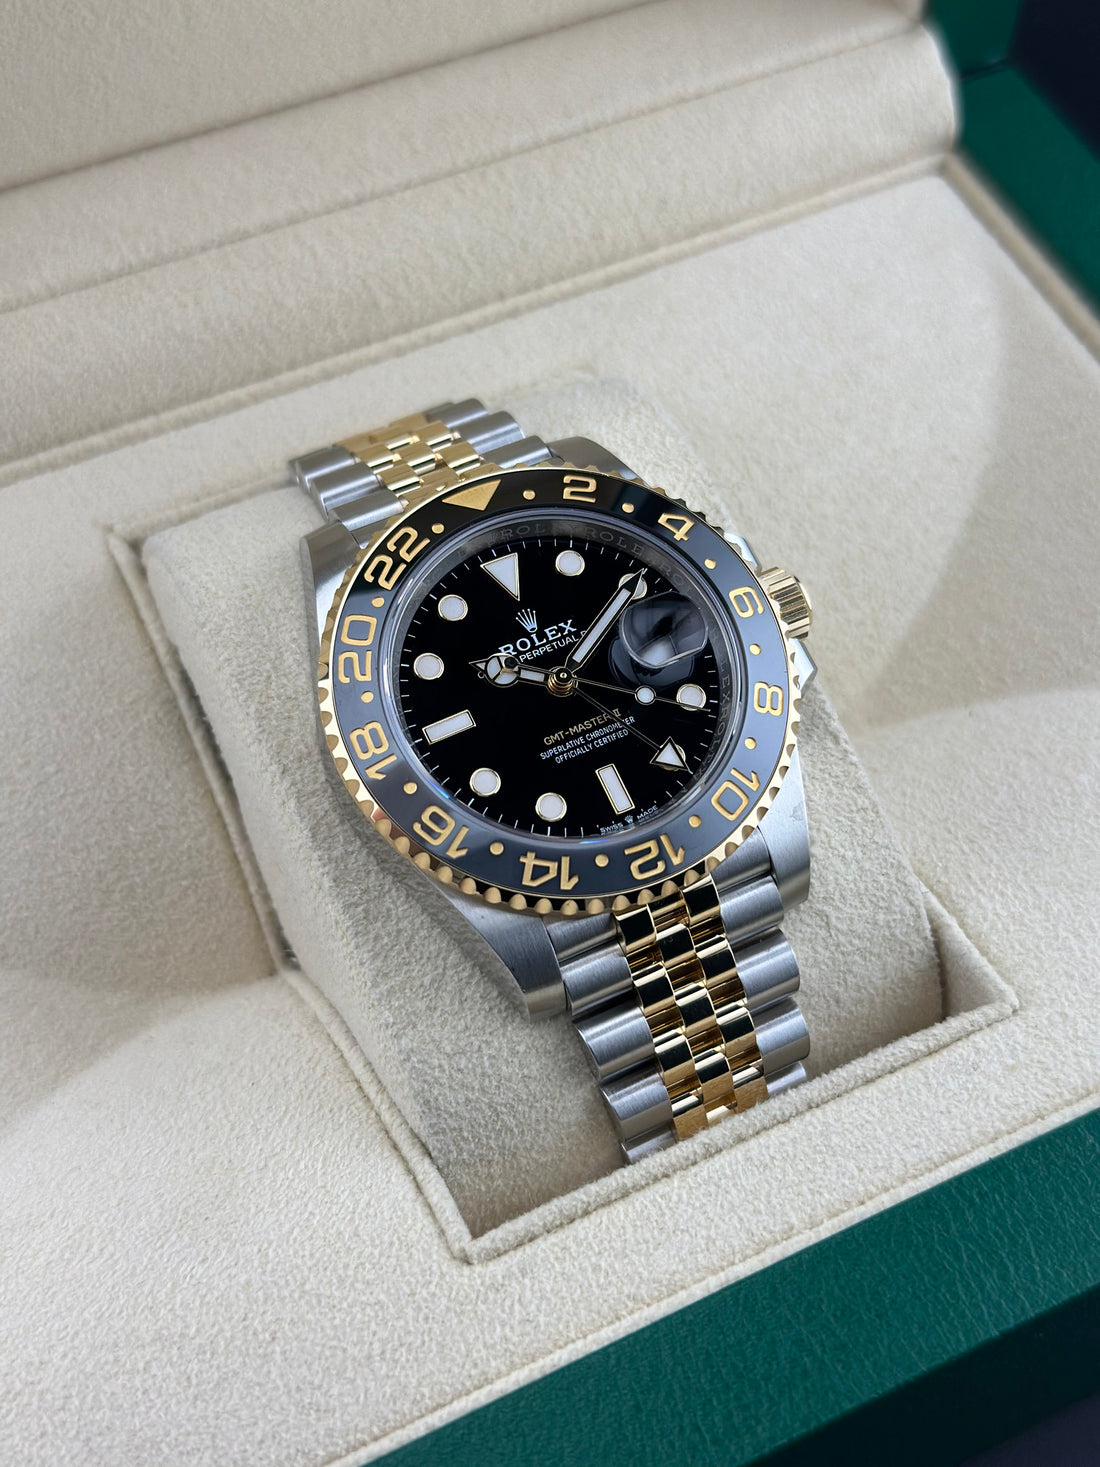 Rolex Stainless Steel GMT-Master II 40mm Black Ceramic Two-Tone Yellow Gold Jubeliee 126713GRNR Bumblebee